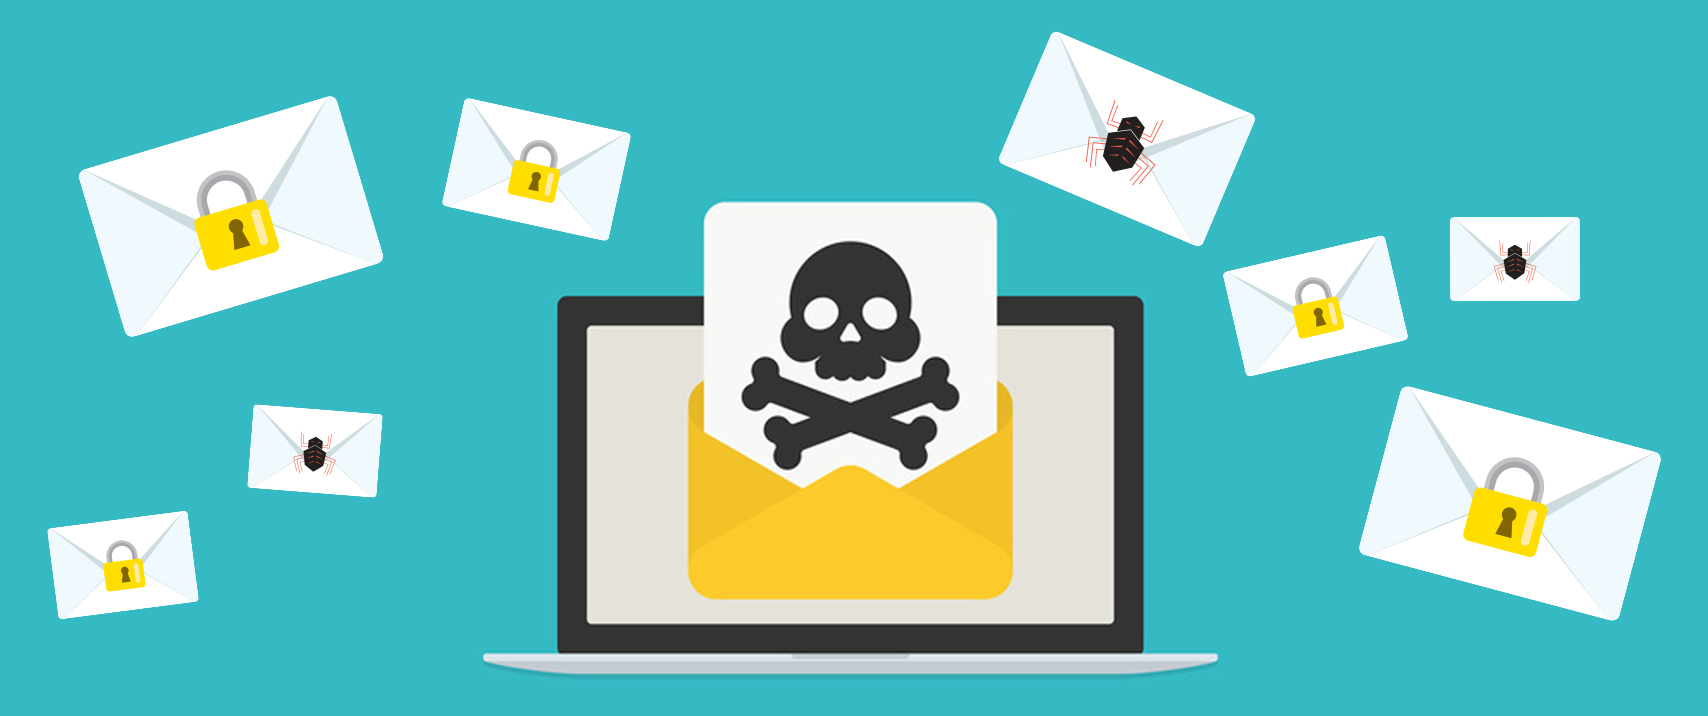 Email Envelops with Locks floating. Laptop with open email and skull on the letter as part of phishing Pen Test